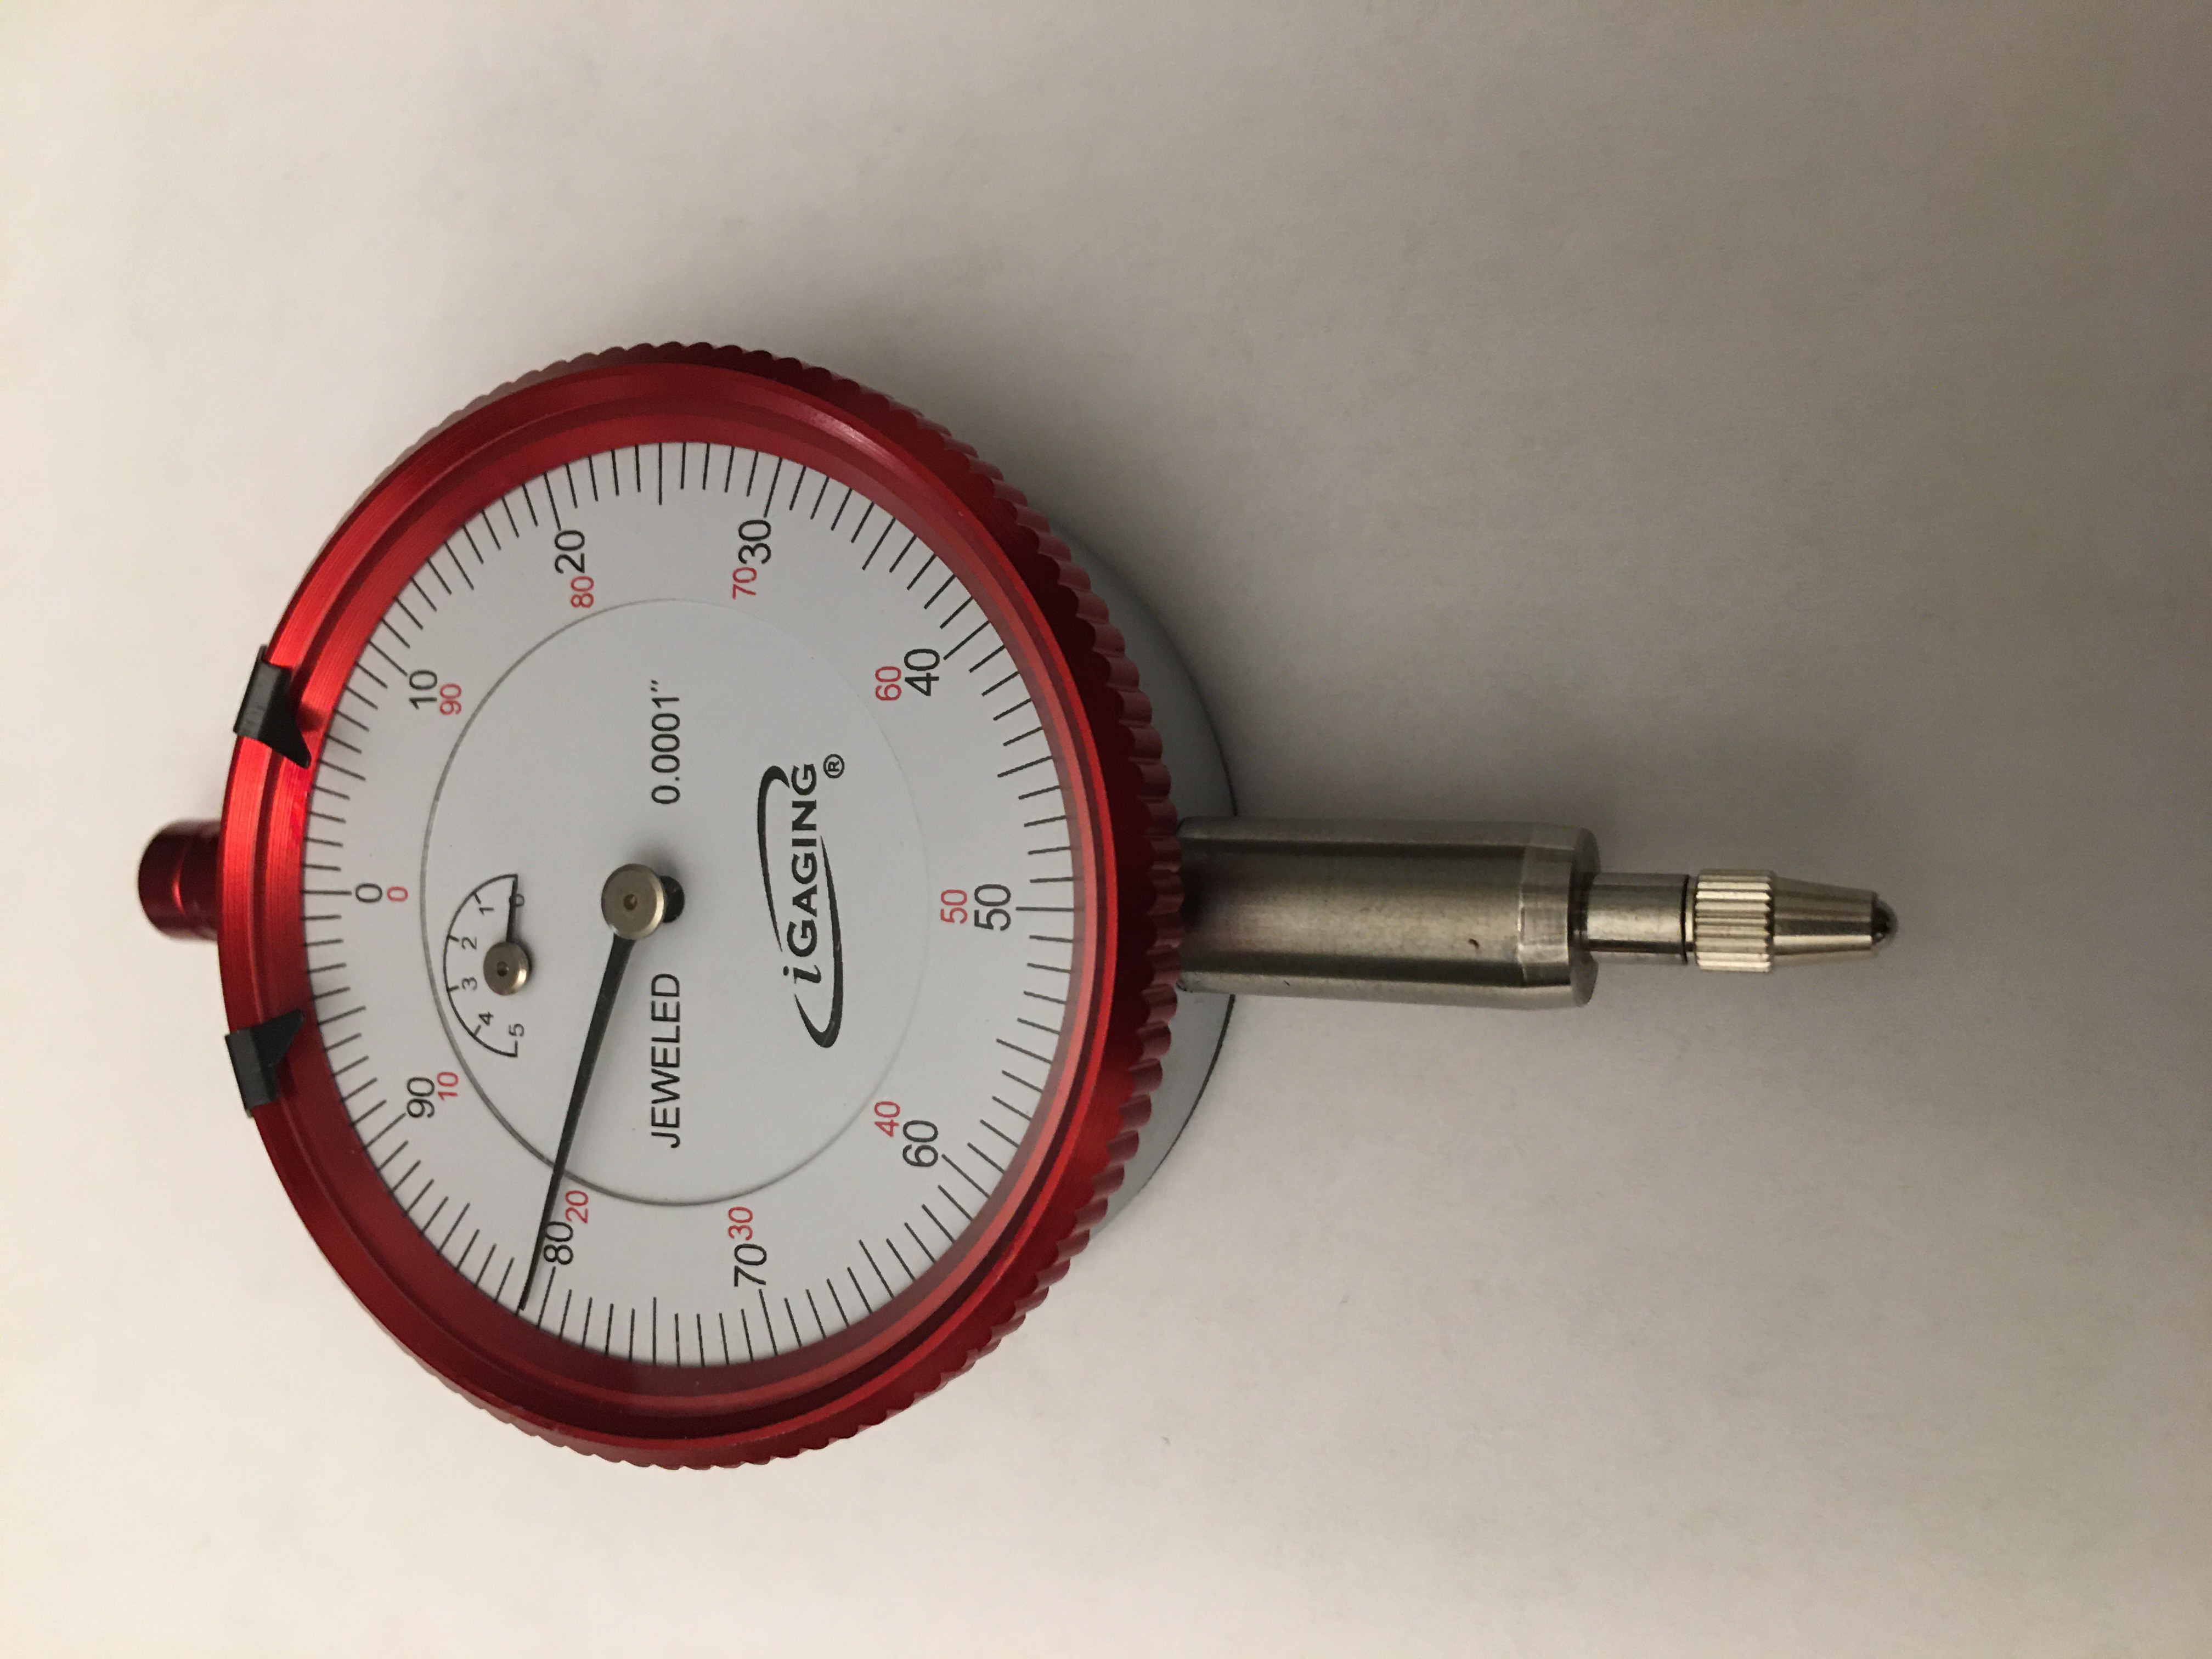 High end Jeweled Dial Indicator with .25" range and 0.0001" Accuracy